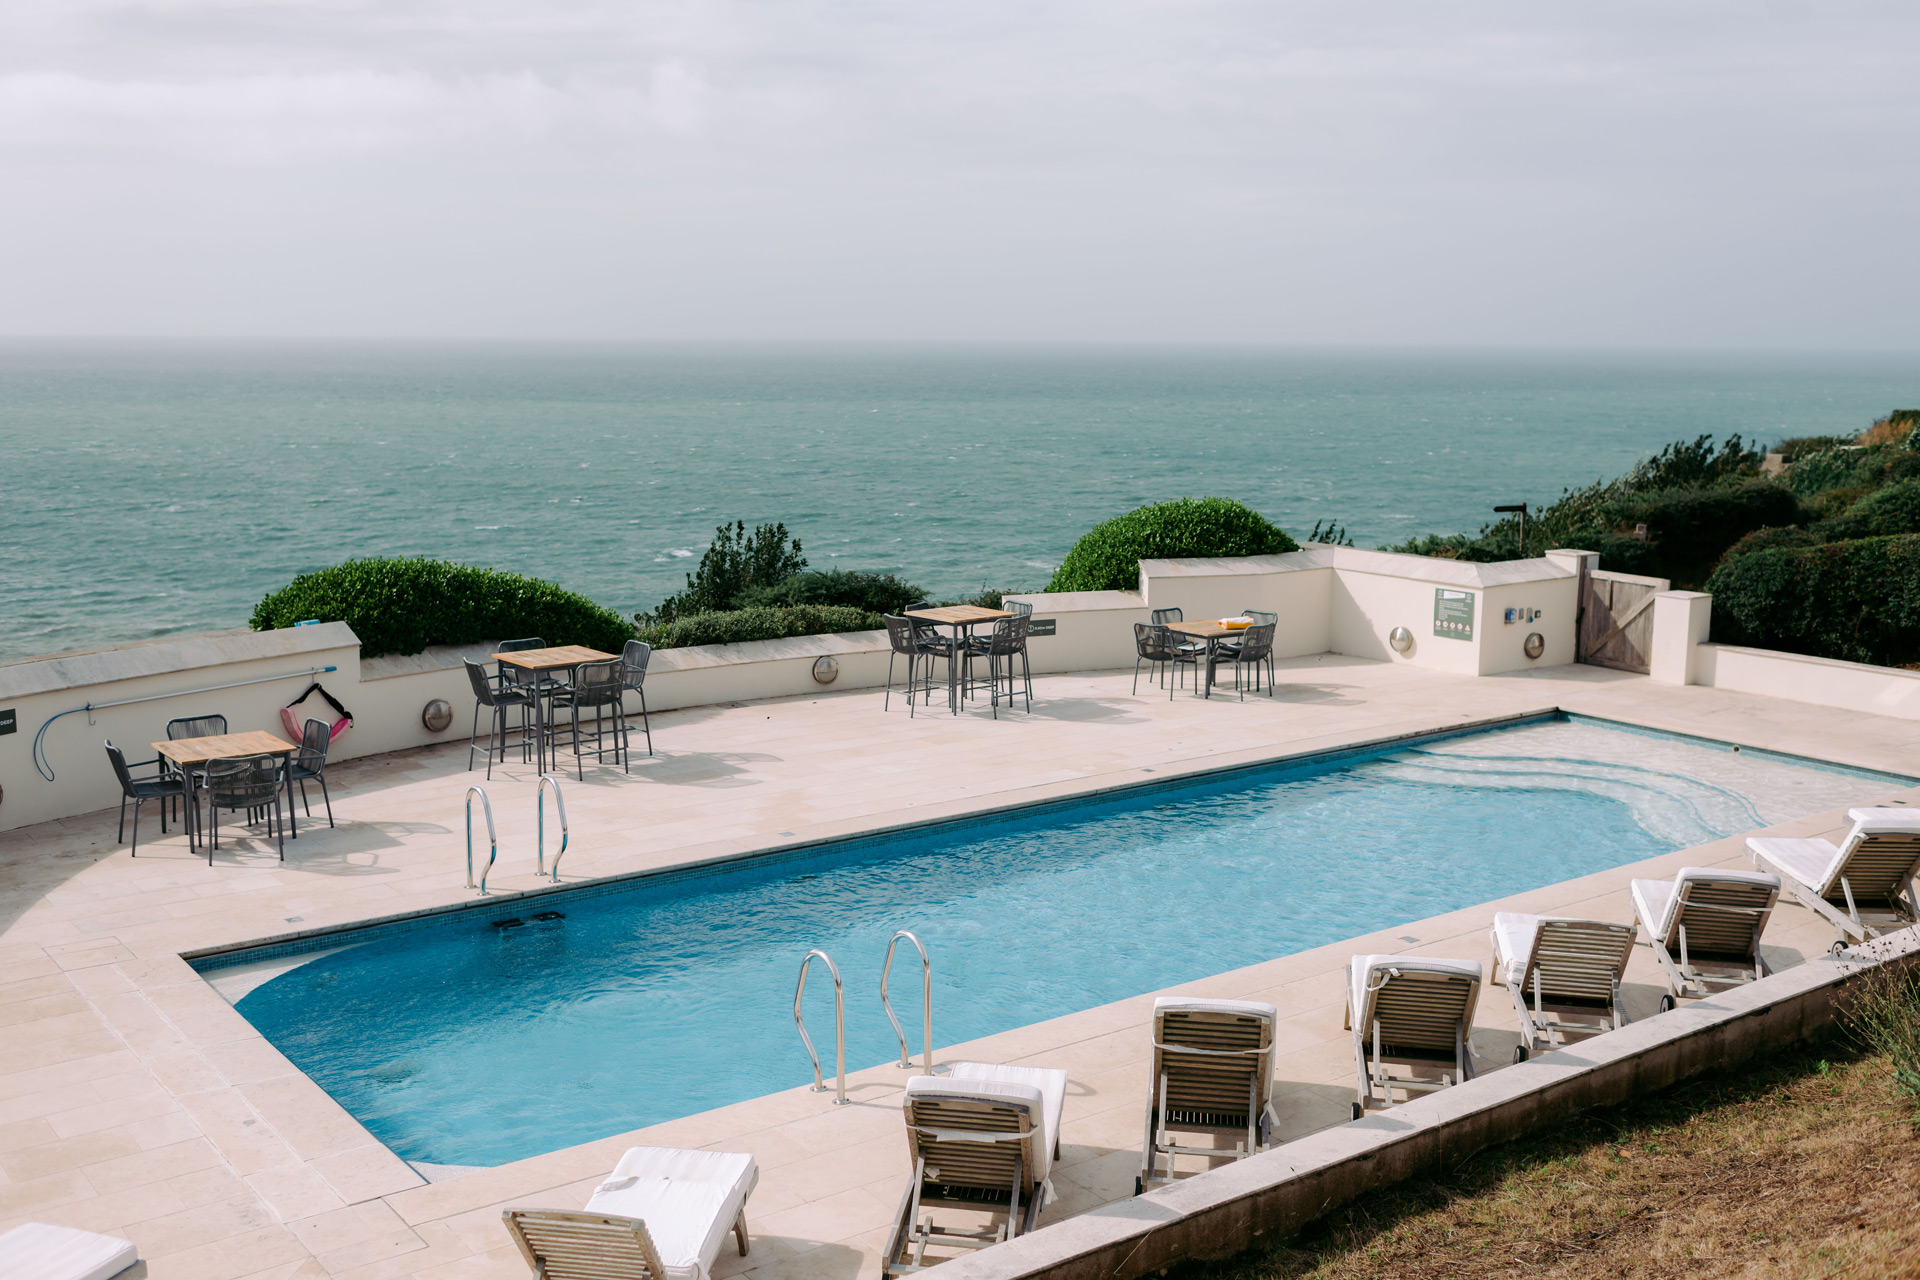 Outside pool with sunbeds surrounding and views of the South Devon coastline